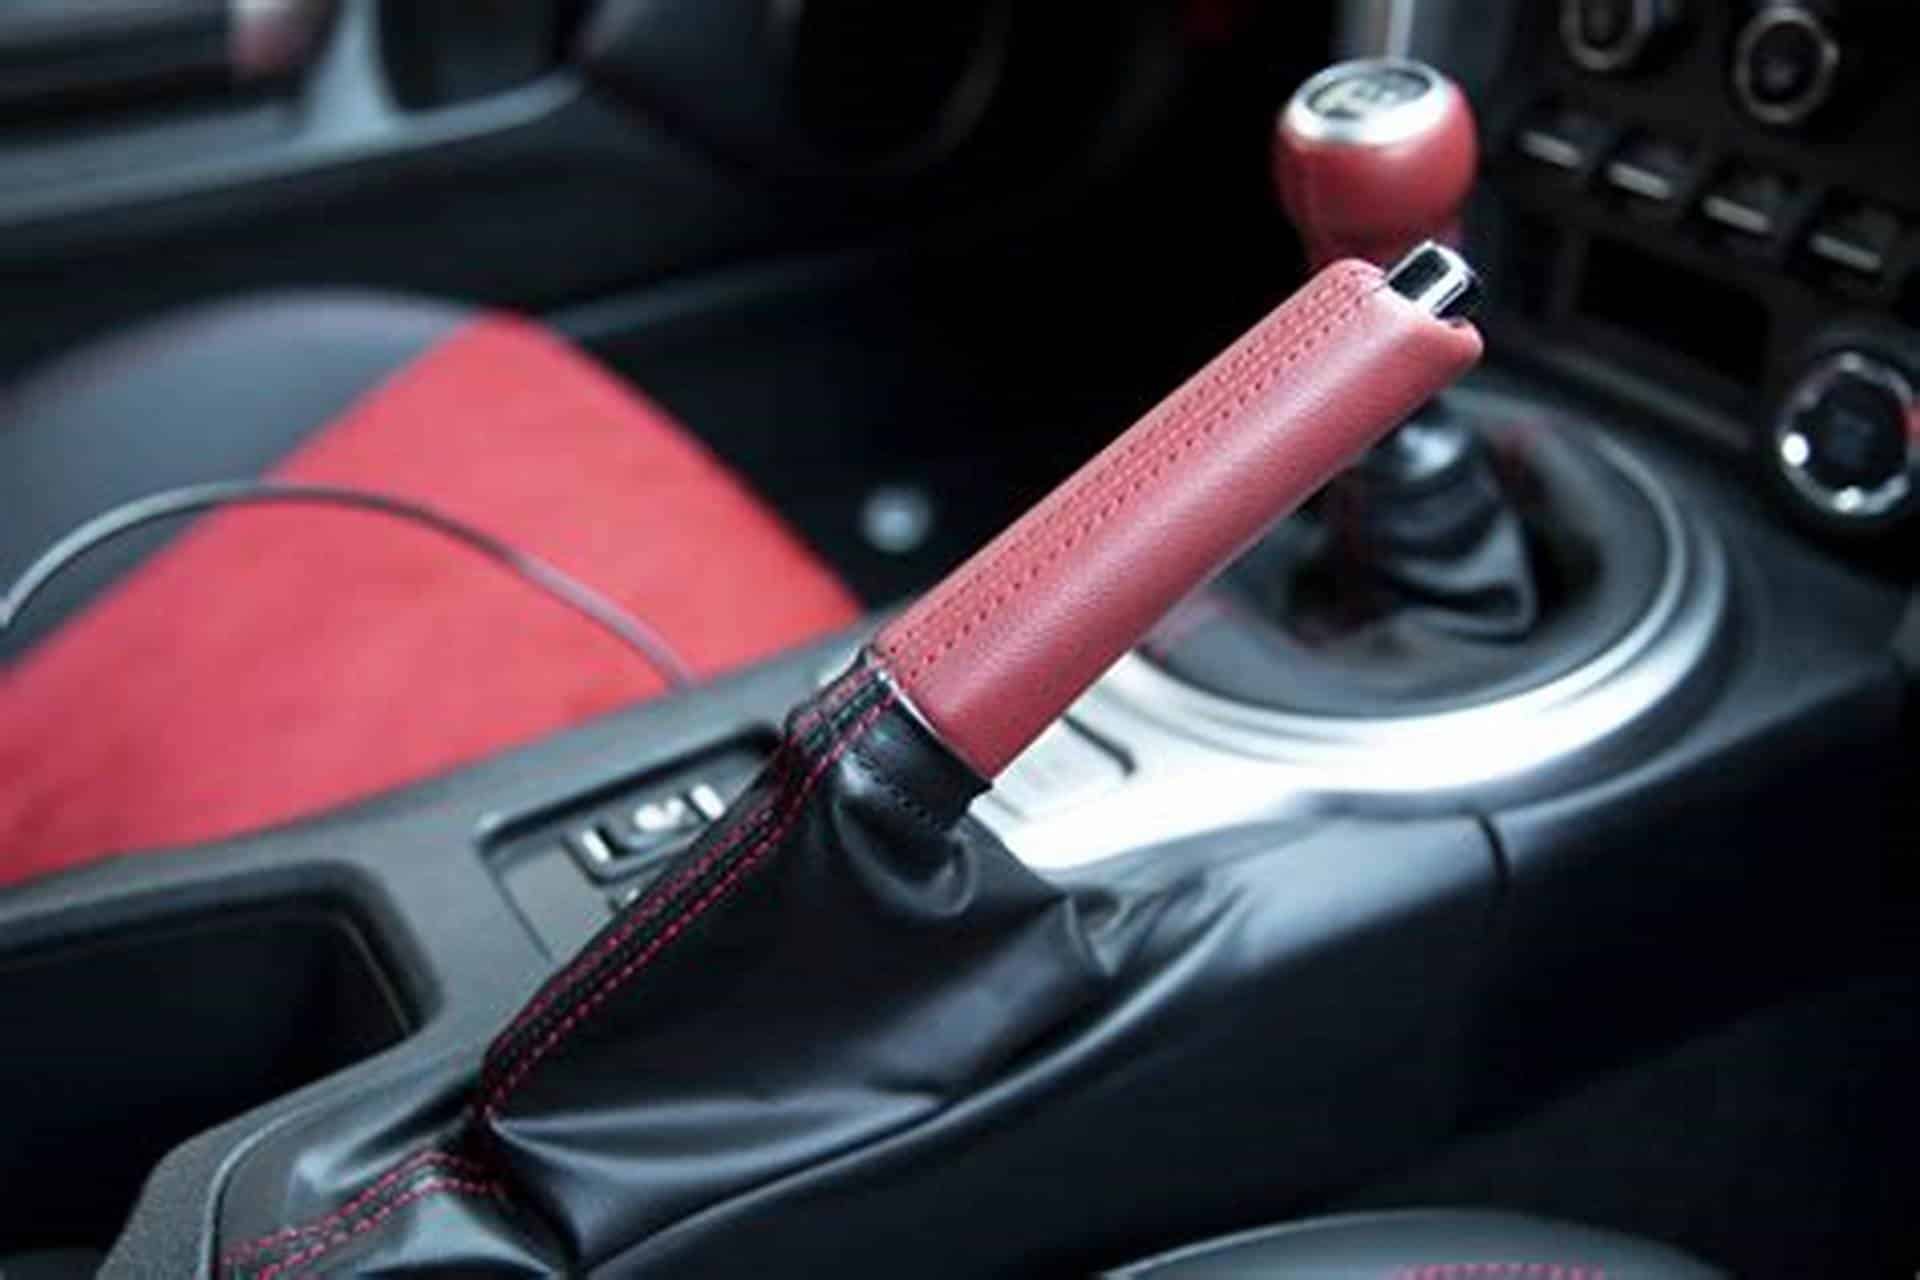 FMI says the parking-brake lever market will grow by more than 50% by 2032